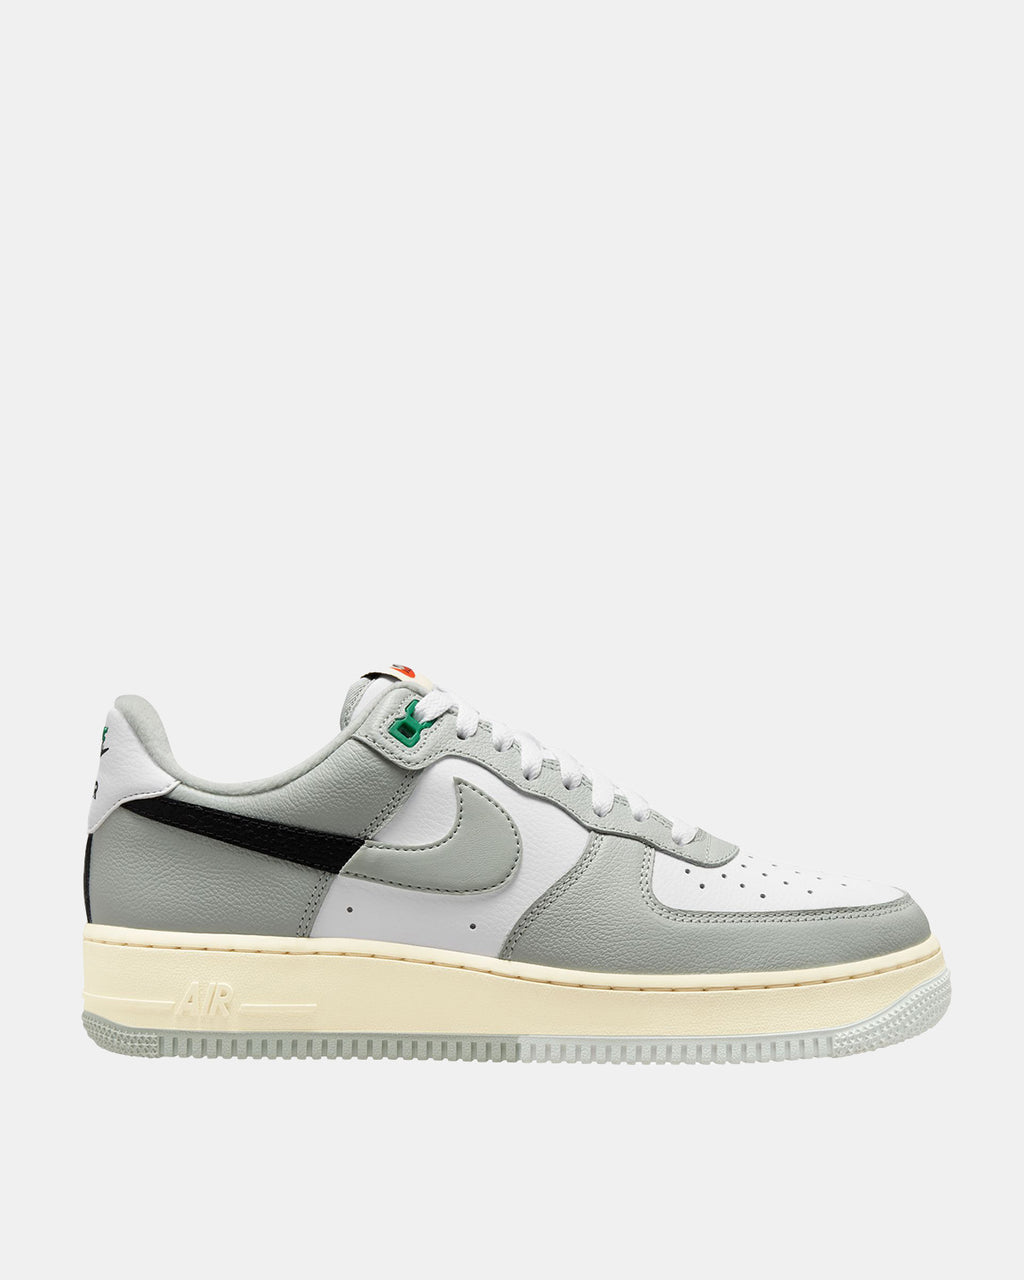 Nike Air Force 1 Low Worldwide Pure Platinum